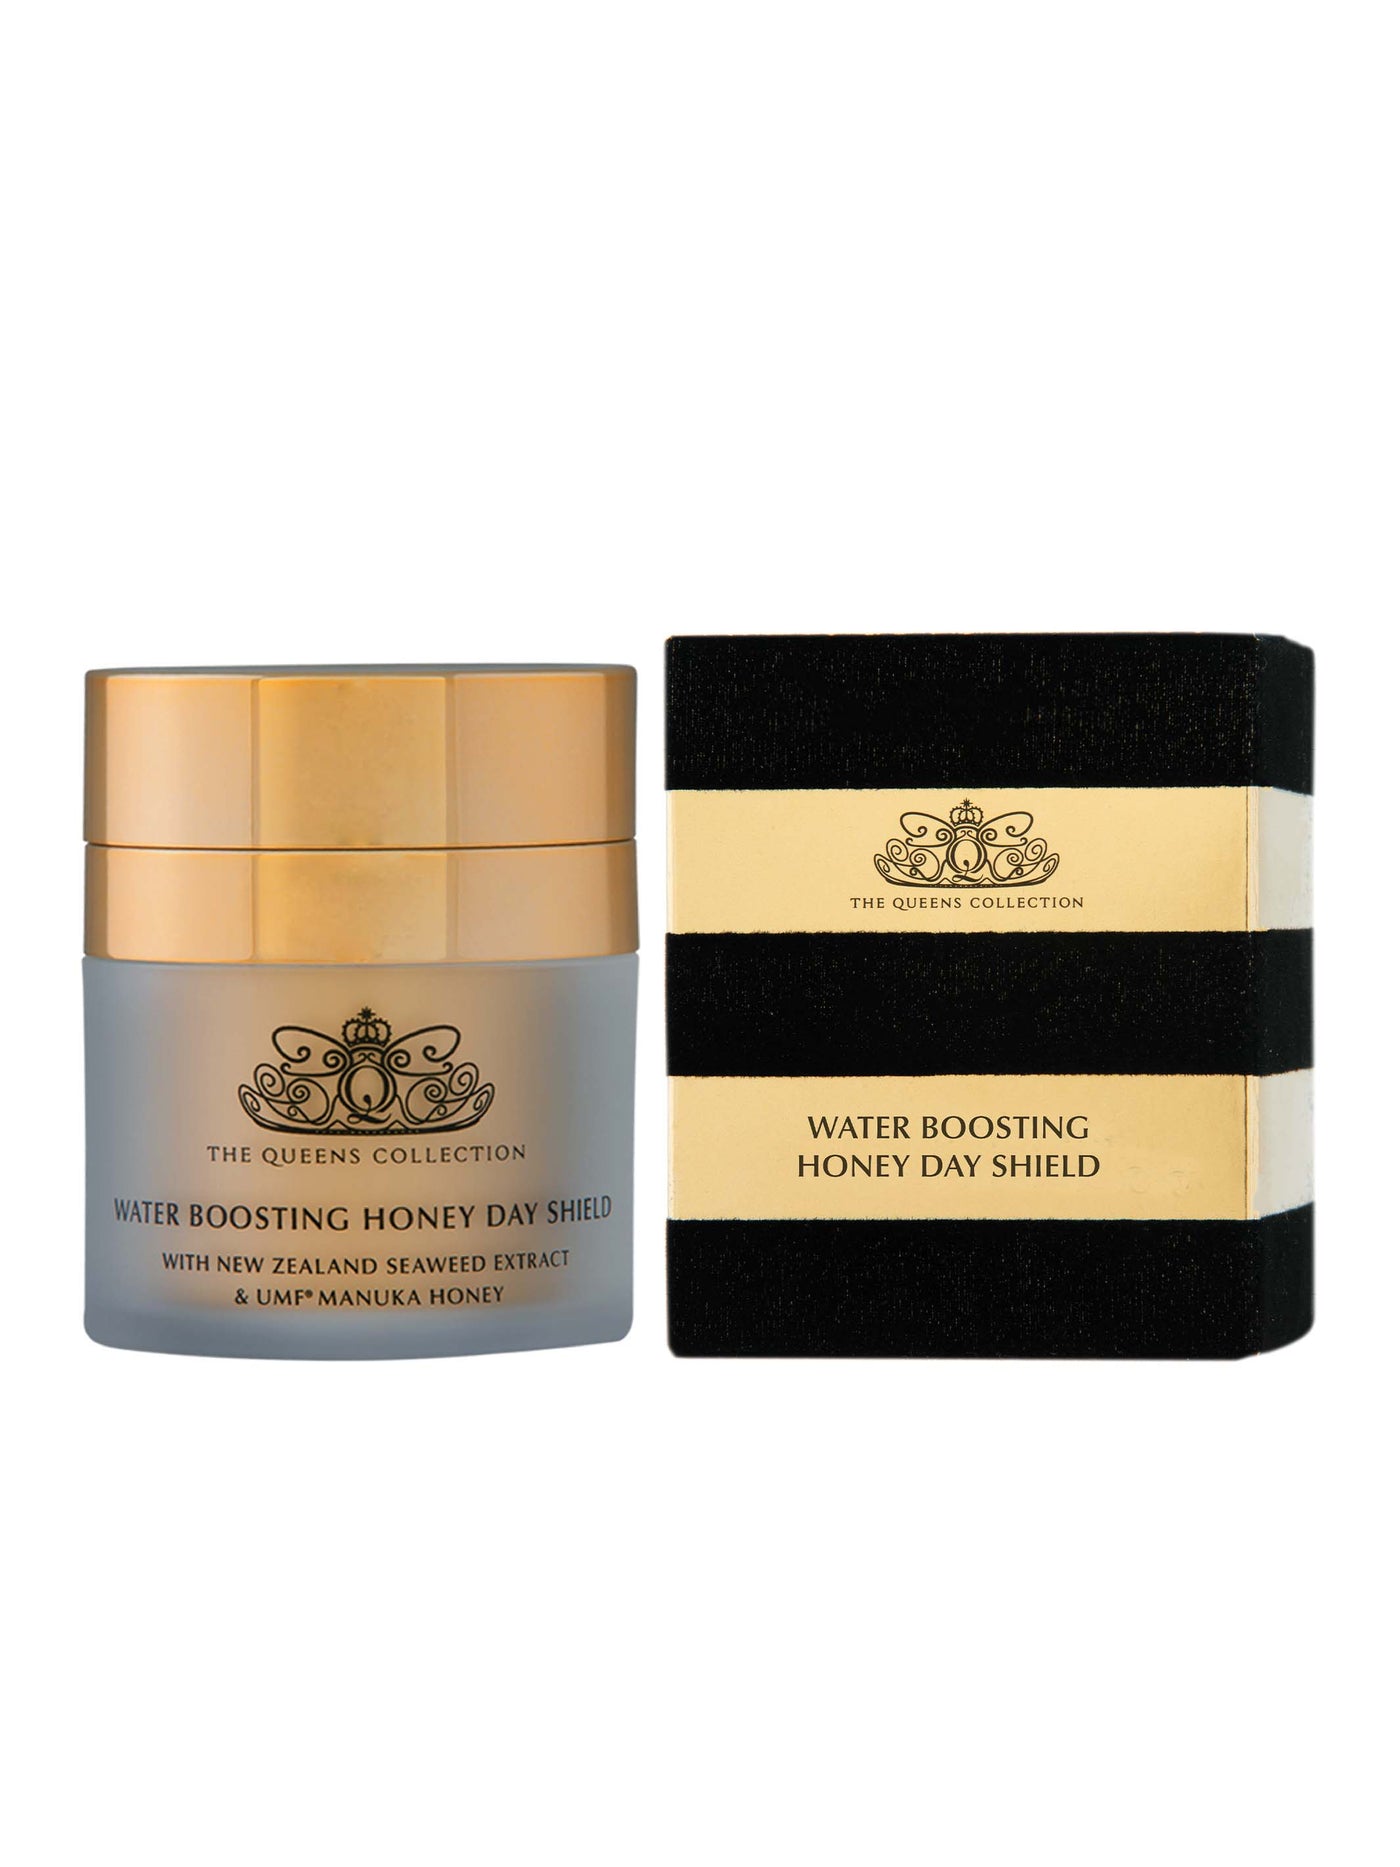 The Queen's Collection - Water Boosting Day Shield Moisturiser